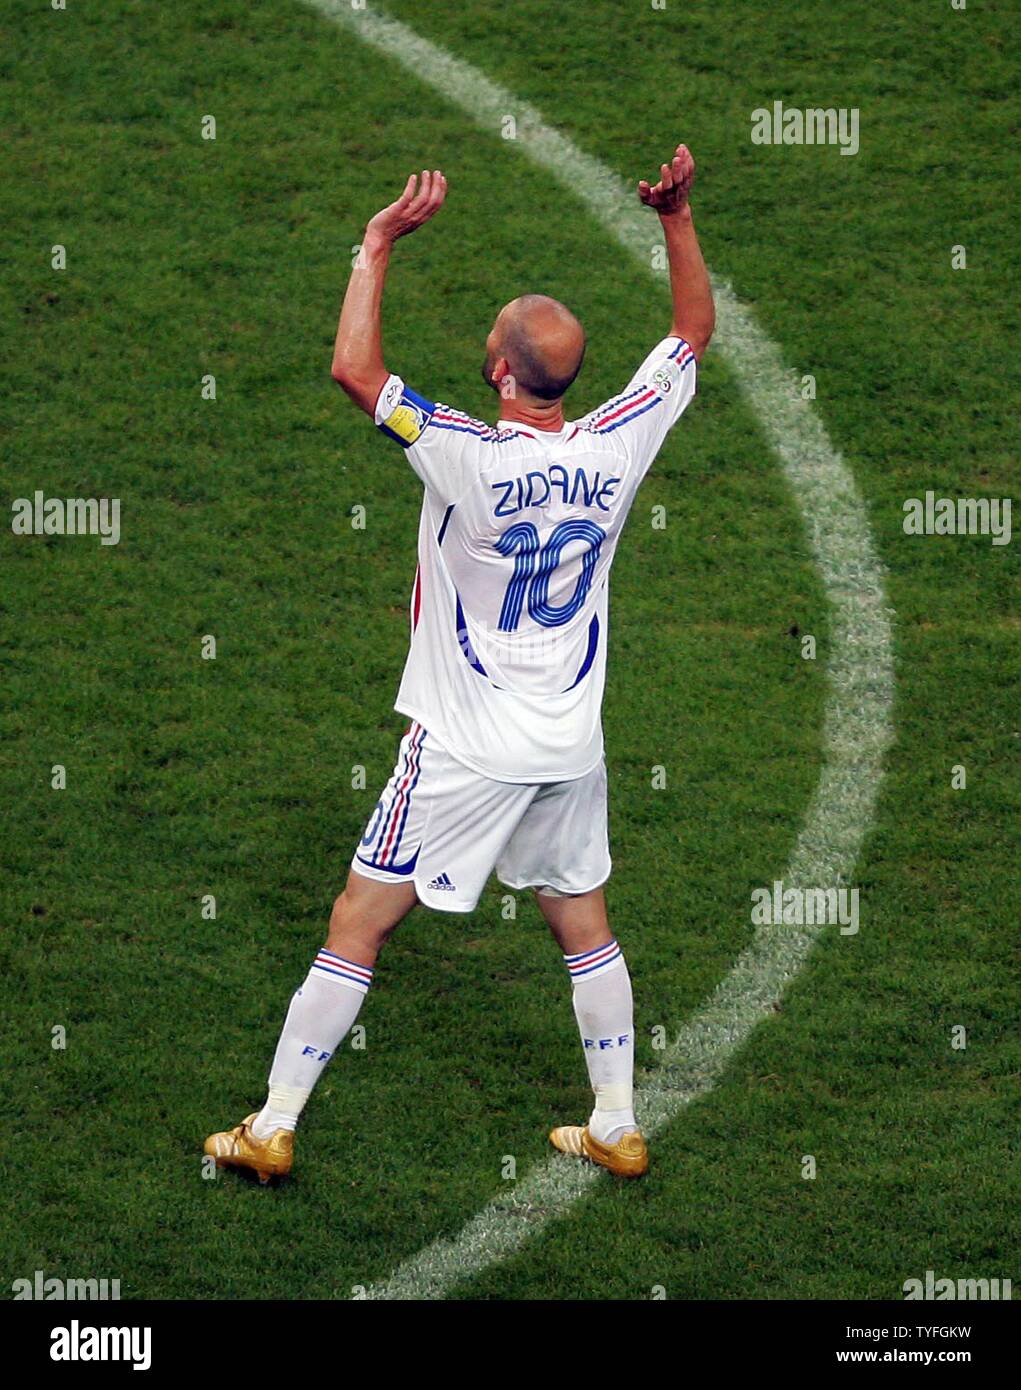 France's Zinedine Zidane celebrates scoring the opening goal from penalty spot during the semi-final of the FIFA World Cup match in Munich Germany on July 5, 2006. France defeated Portugal 1:0. (UPI  Photo/Christian Brunskill) Stock Photo